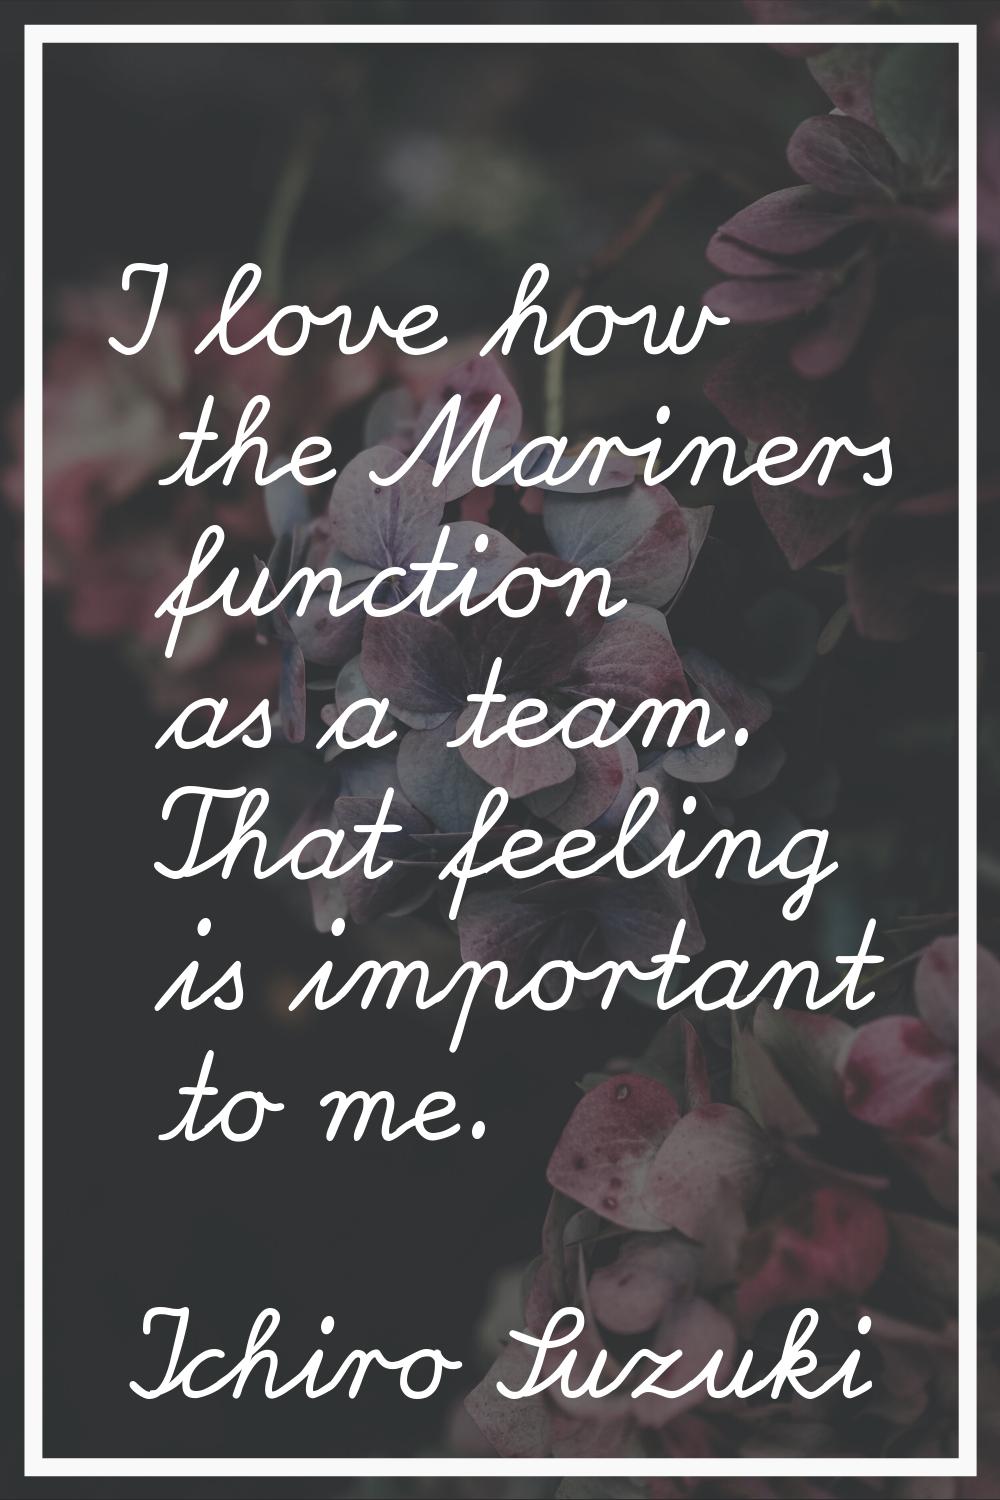 I love how the Mariners function as a team. That feeling is important to me.